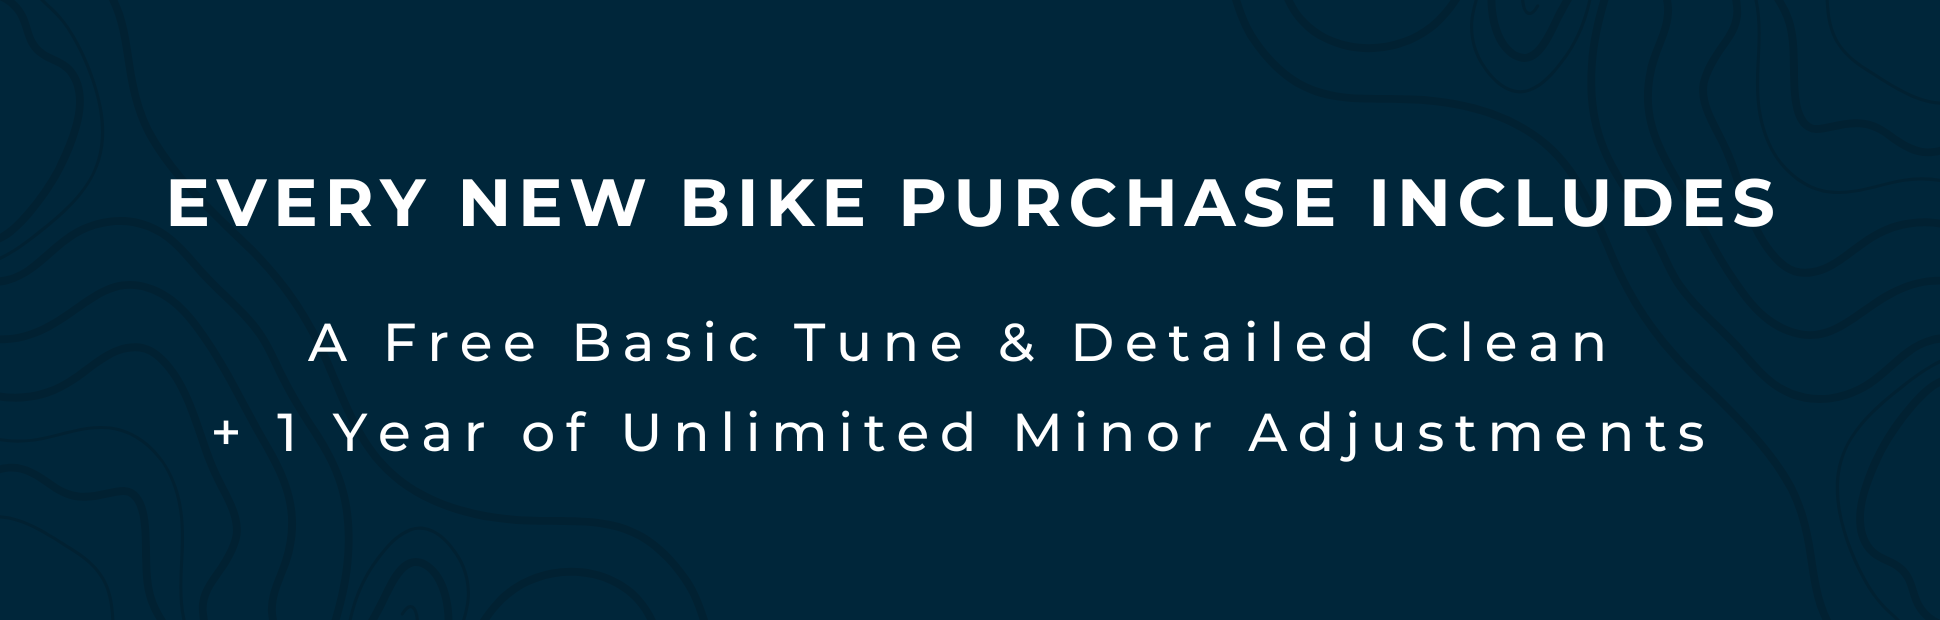 New bike purchase includes: free basic tune, detailed clean, 1 year unlimited minor adjustments